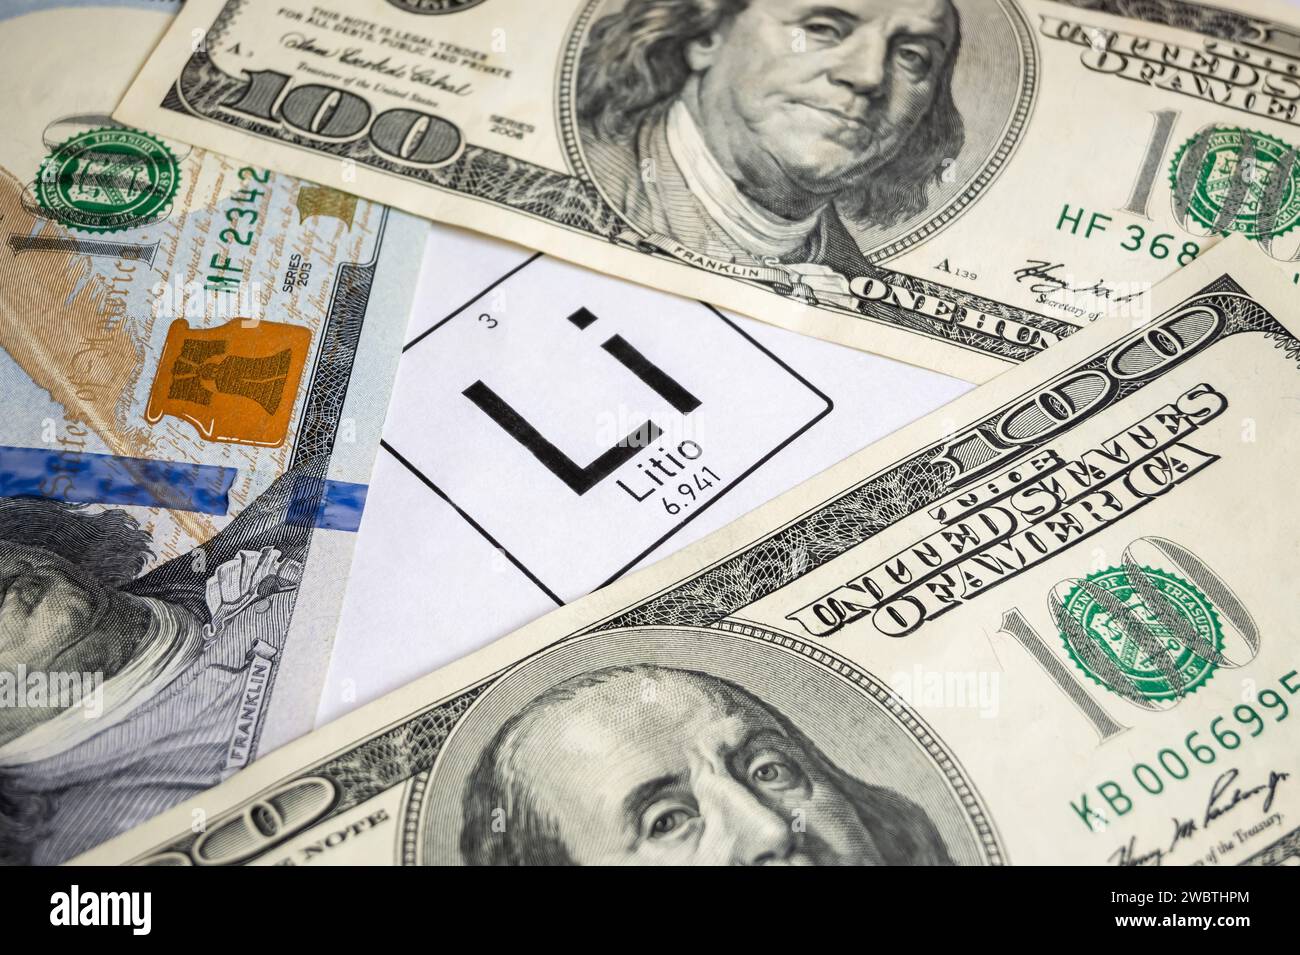 Lithium symbol surrounded by hundred dollar bills. Stock Photo